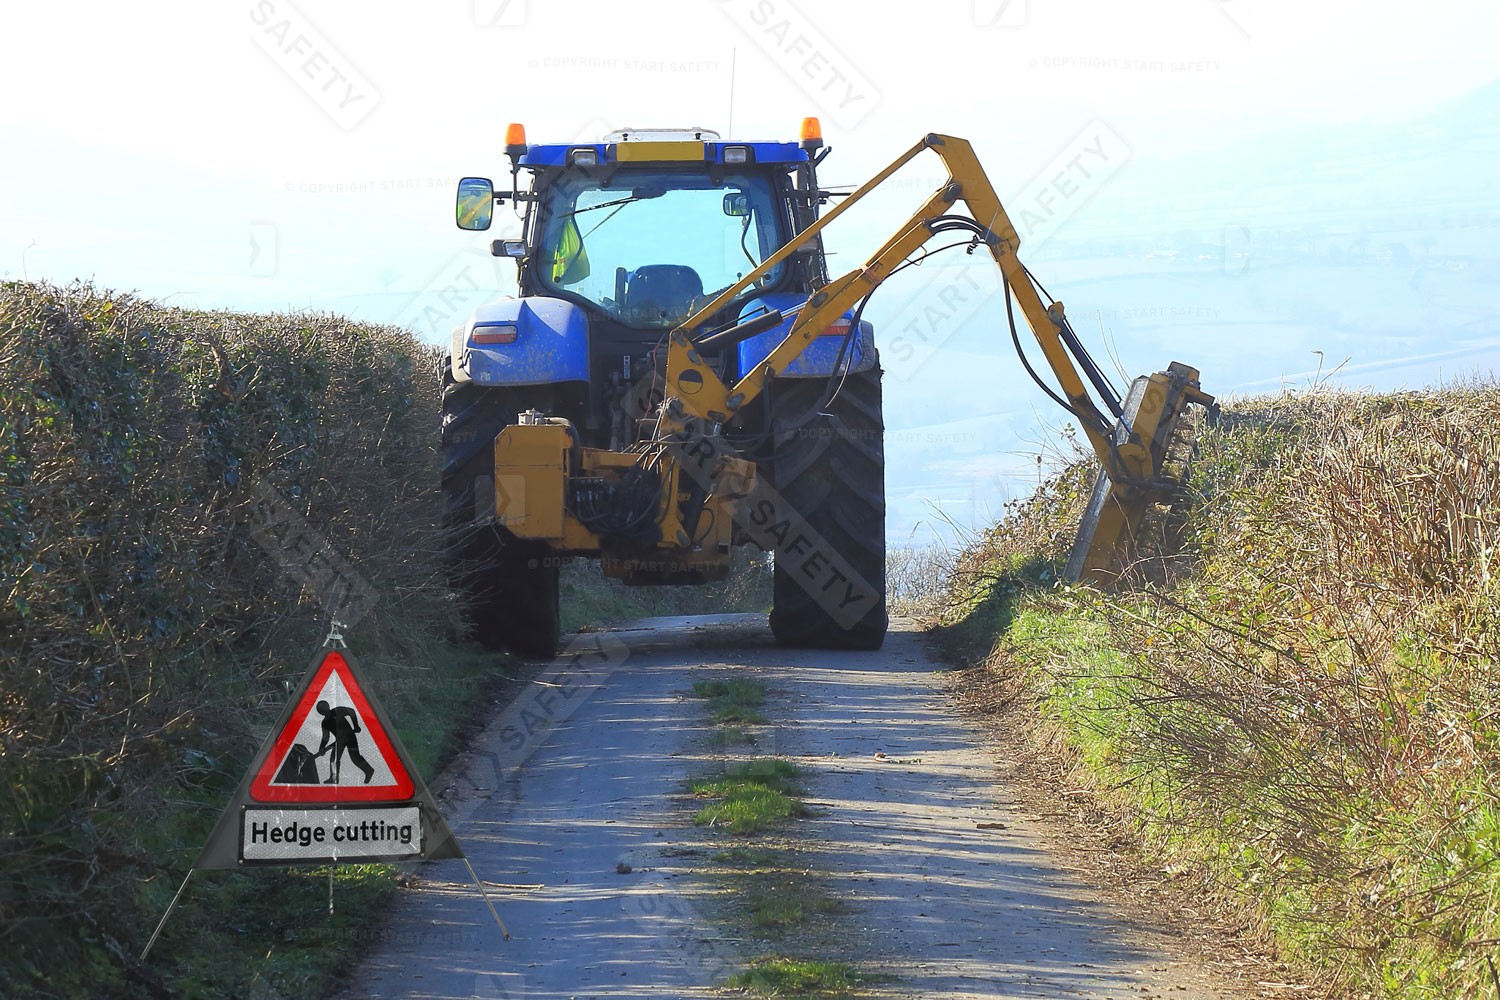 Men At Work Roll Up Hedge Cutting Sign In Use